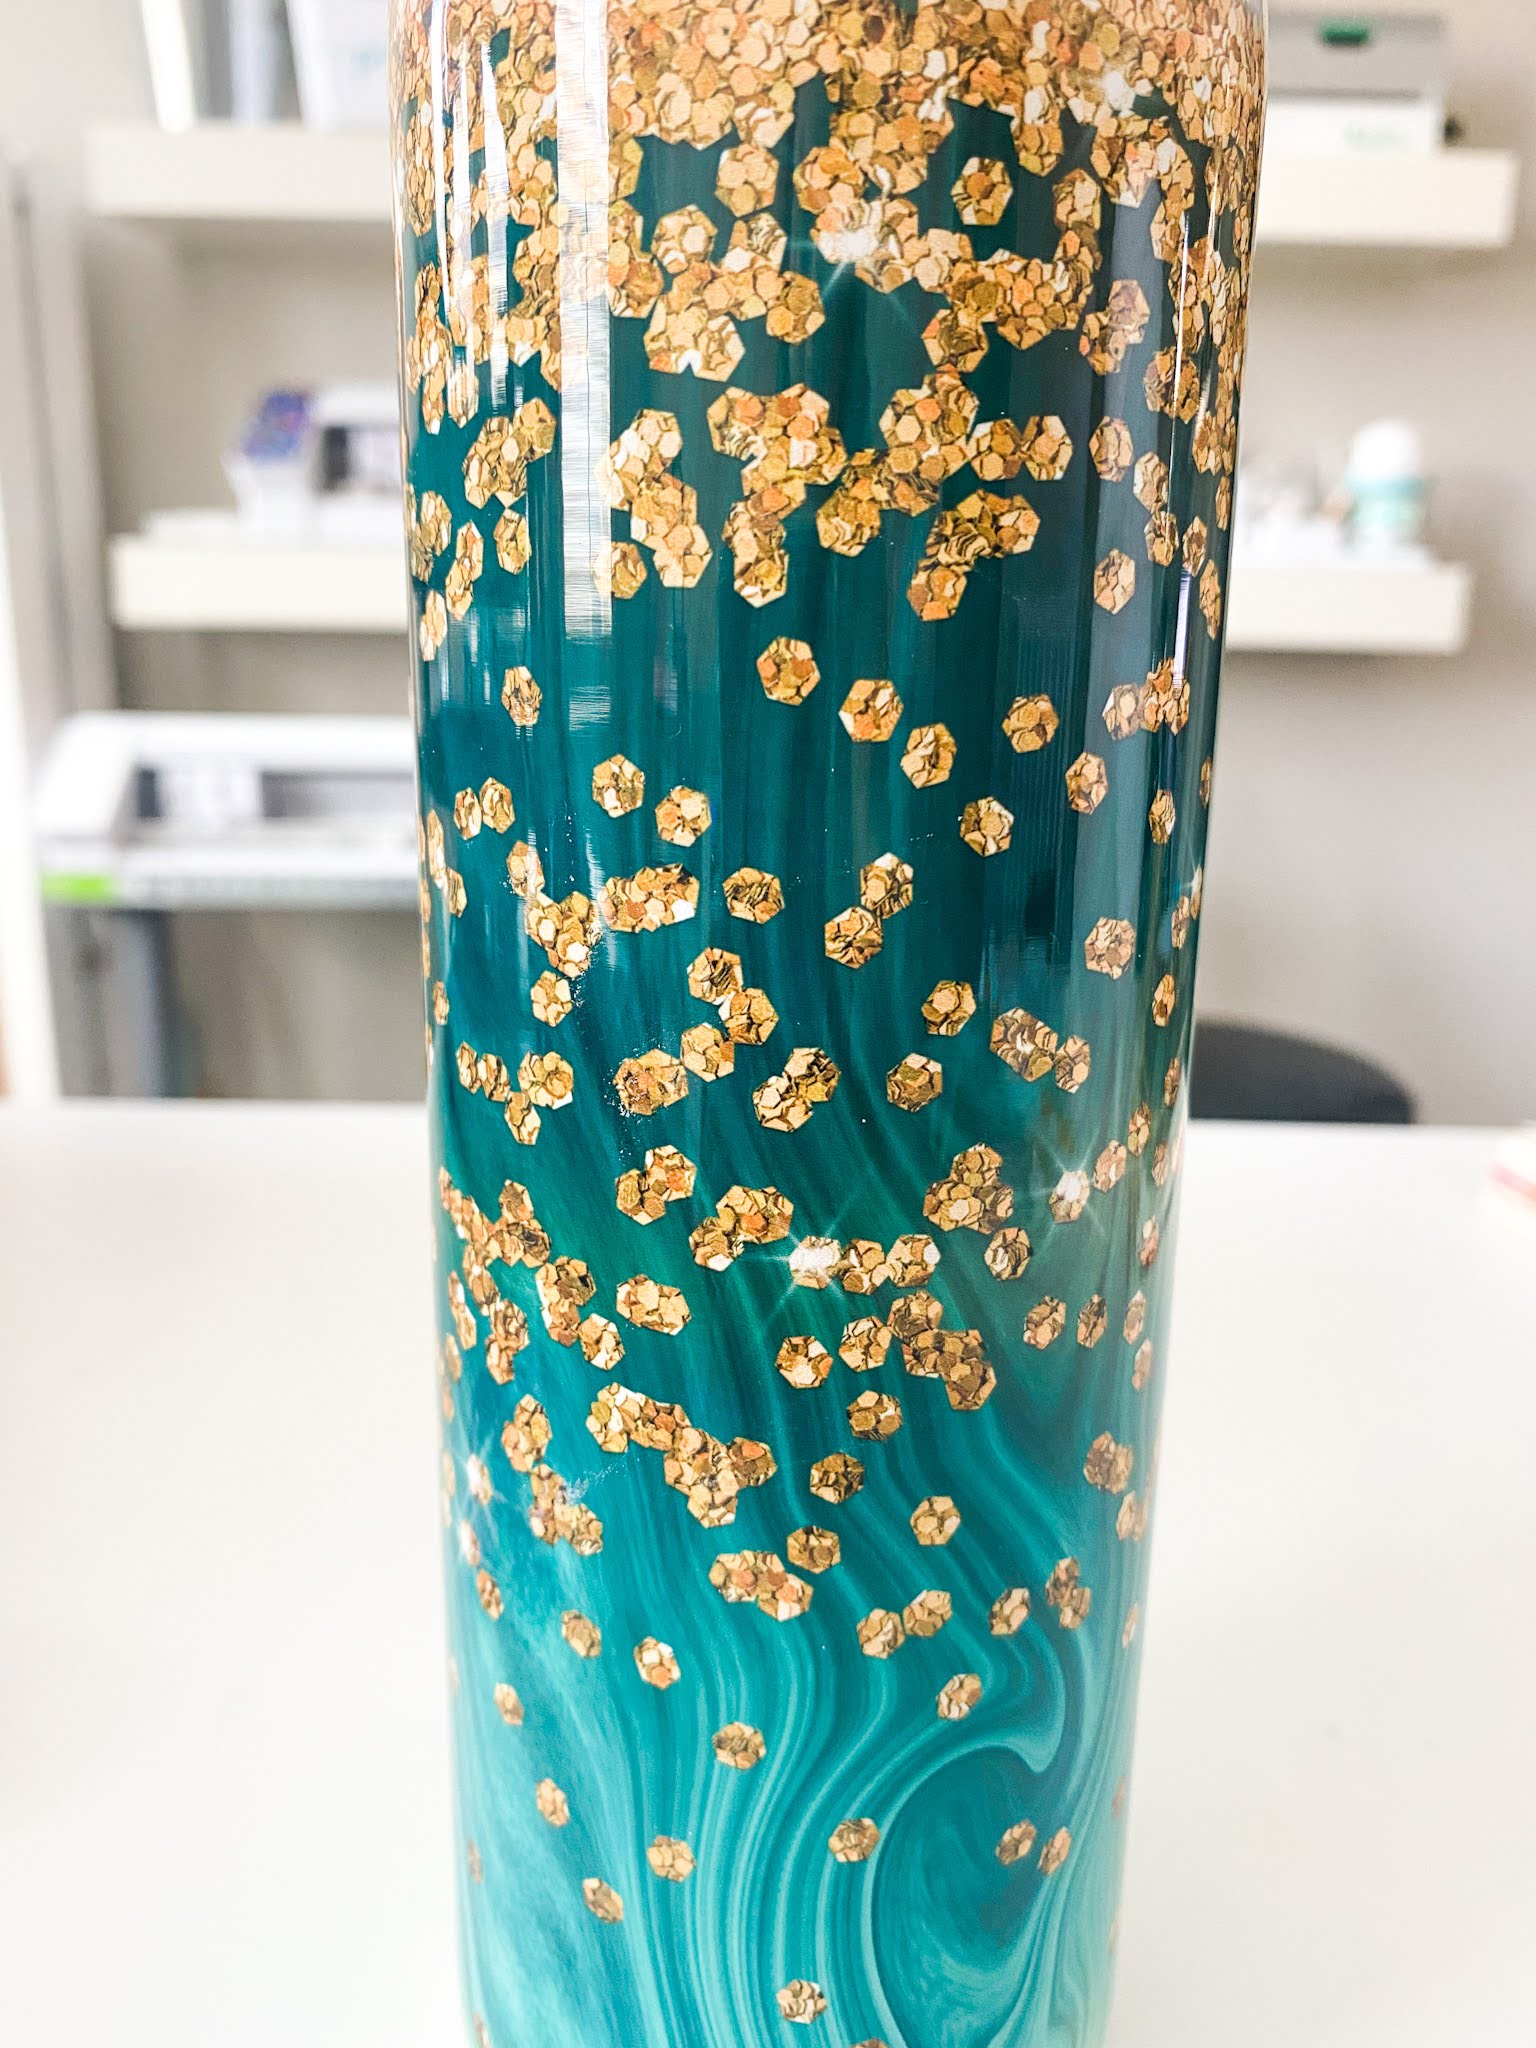 HOW TO SUBLIMATE A GLITTER TUMBLER